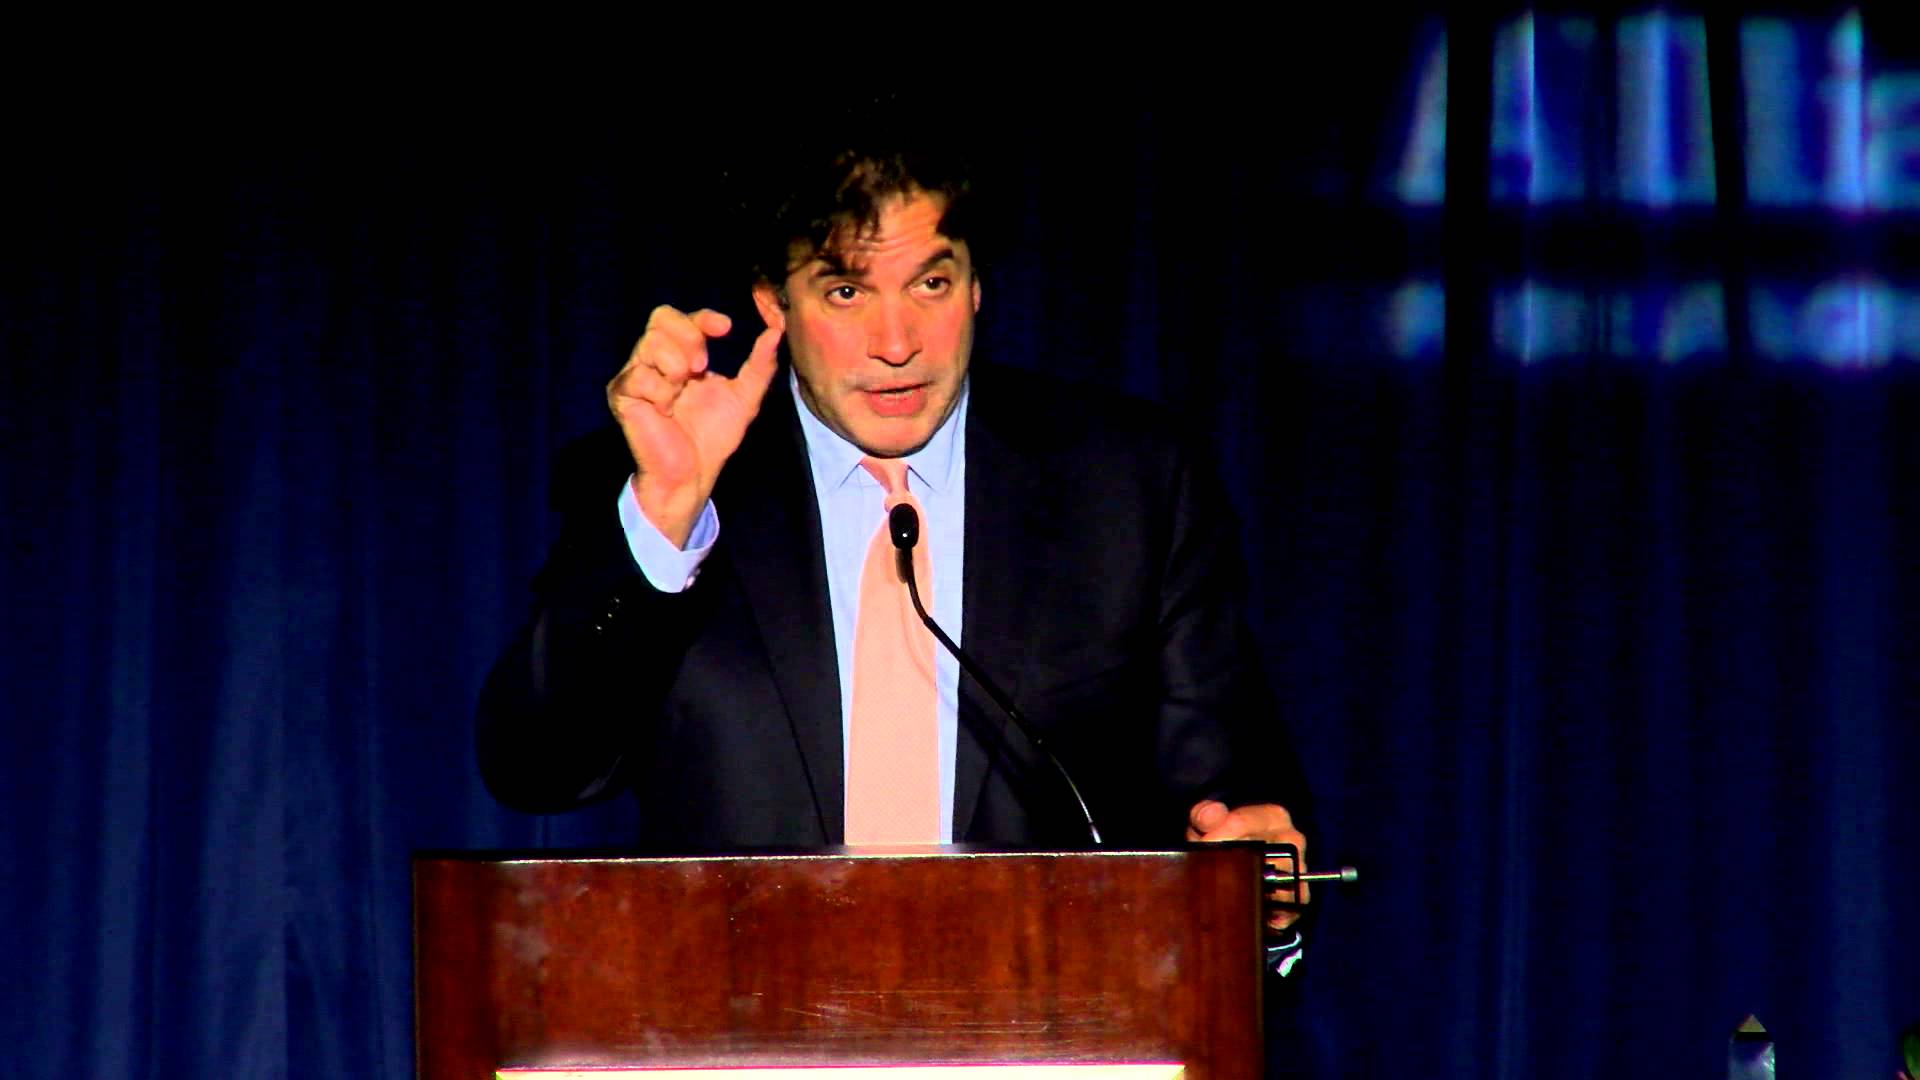 Dr. Rudolph E. Tanzi speaking at Alliance for Aging Research 2015 Annual Dinner.